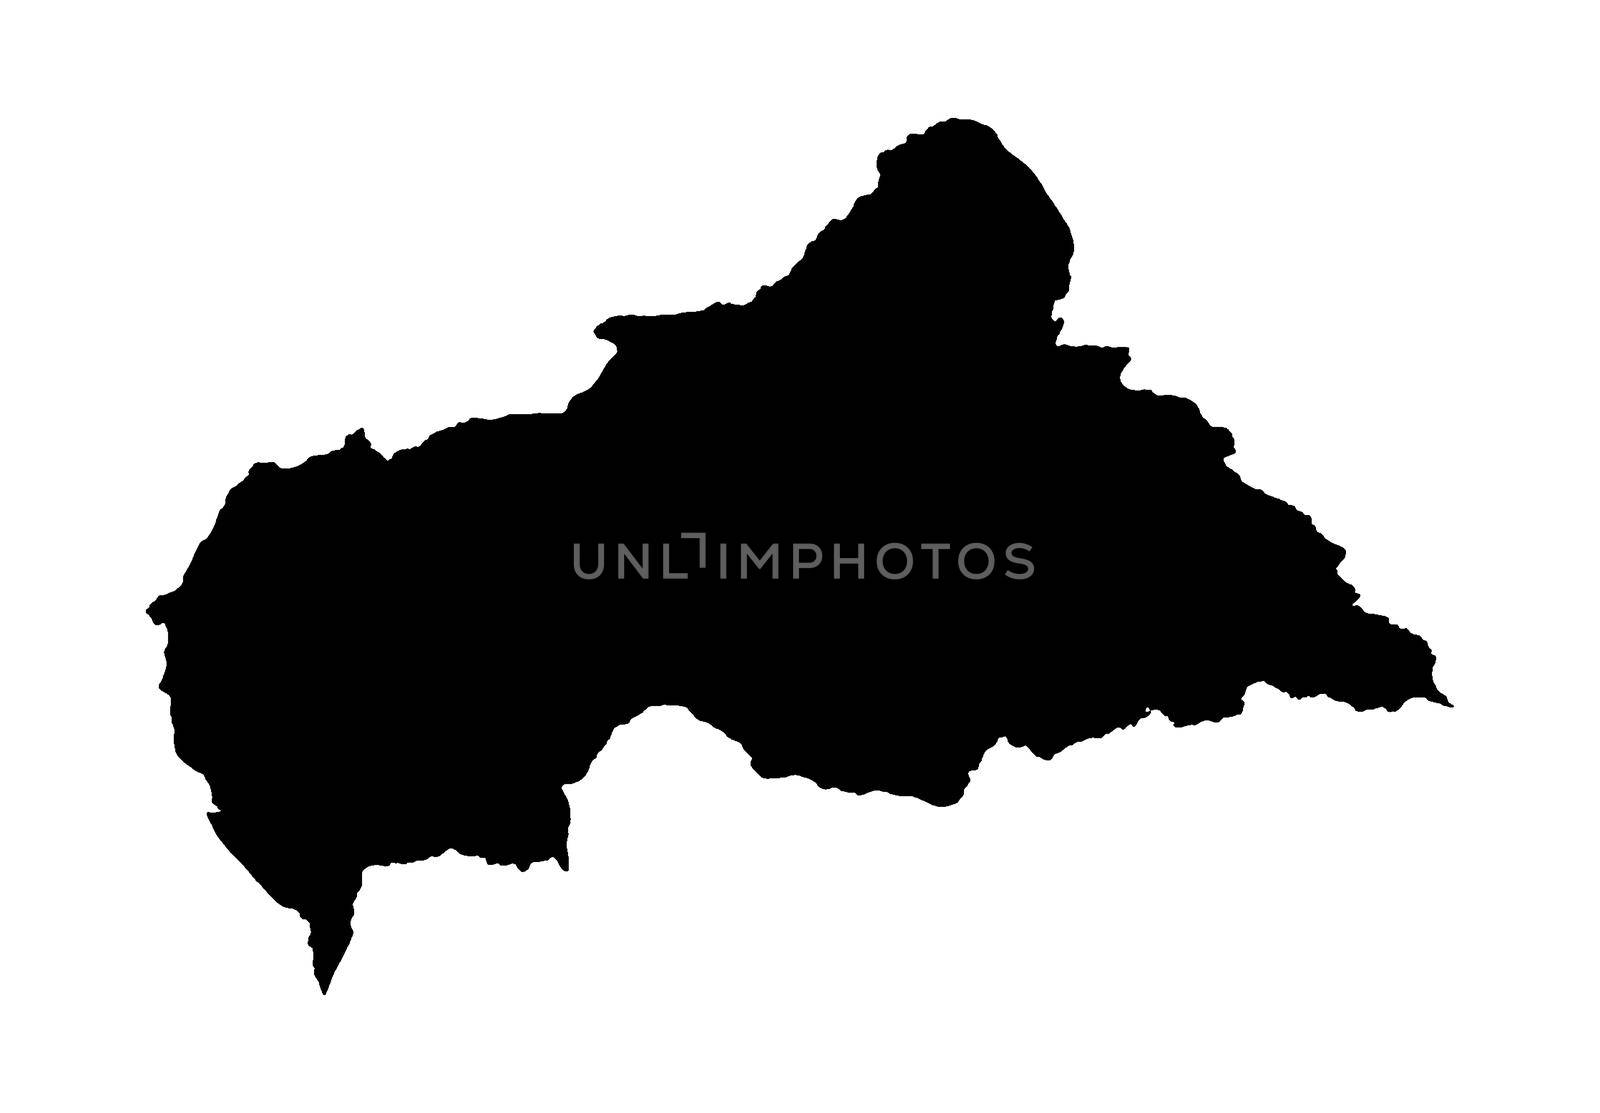 Central African Republic outline silhouette map in black isolated over a white background